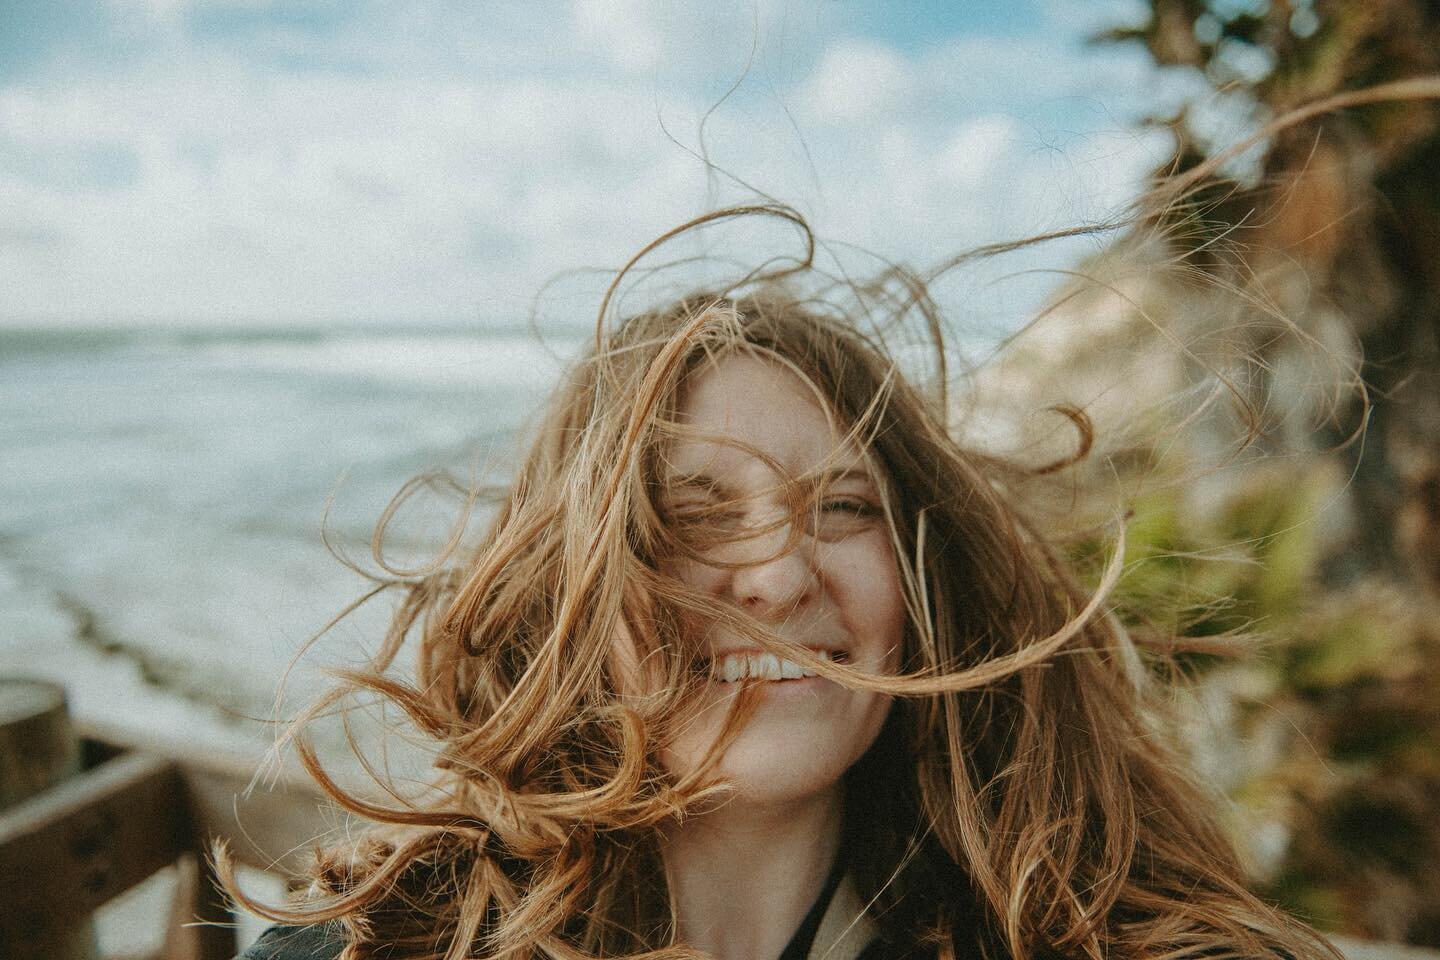 Happy earth day from me, my hair, the wind, and encinitas. 

Still pinching myself seven years later that this is my home. Pick up trash if you see it. Balloons are not a friend to the ocean. Recycle when you can. Love where you live. 

Let me know- 